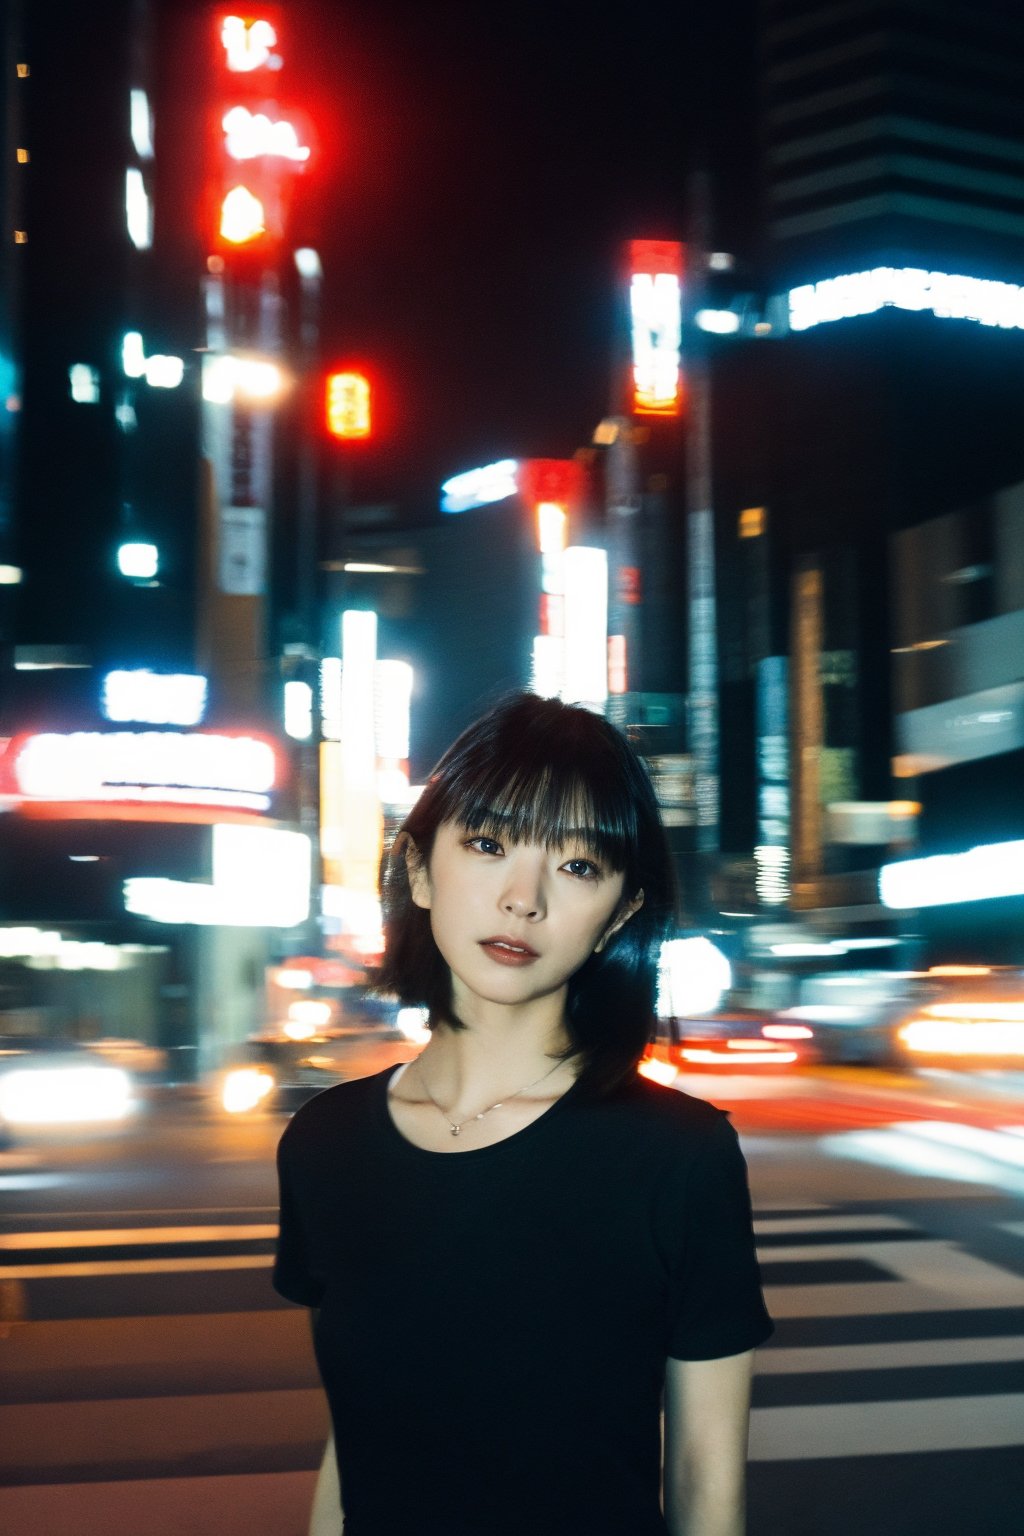 A young Asian woman, short hair, wearing a black t-shirt with Japanese text, black shorts, necklace, standing in a city setting at night, with blurred lights and buildings in the background, low angle shot, street fashion, Tokyo cityscape, night photography, urban style, candid pose, with a hint of film grain.
